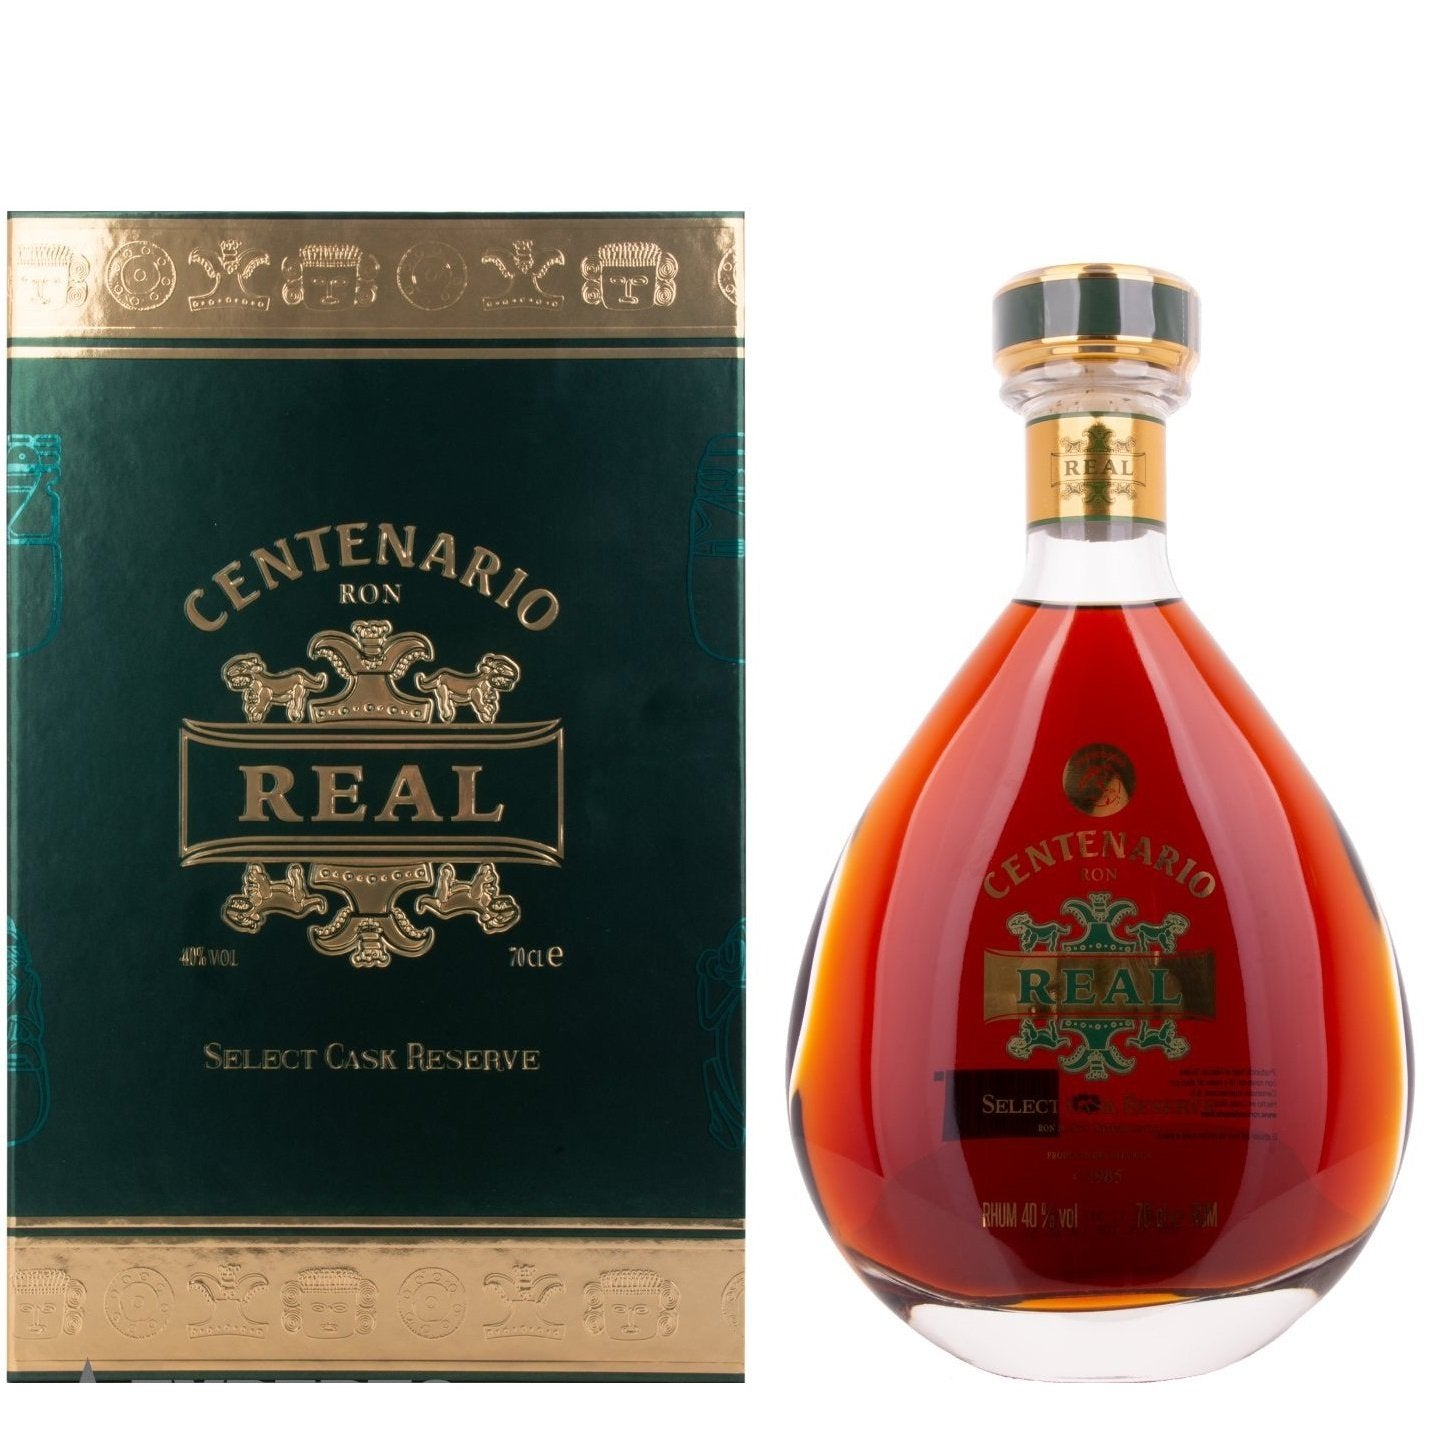 Ron Centenario REAL Select Cask 0,7 Rum - Reserve Edition Vol. Old 40